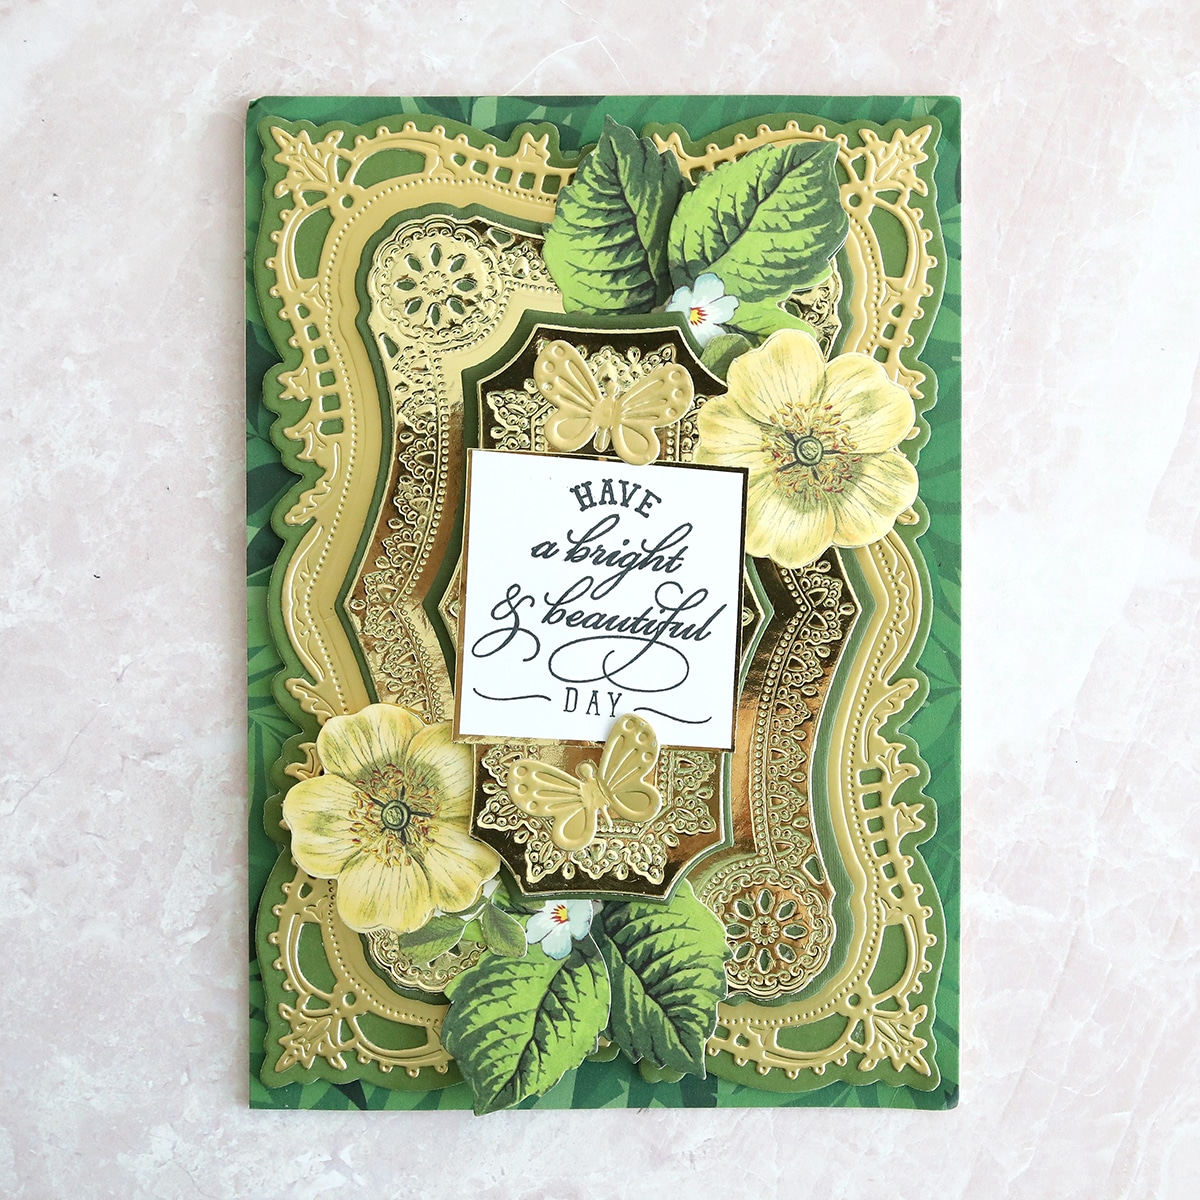 A green card with flowers and leaves on it.